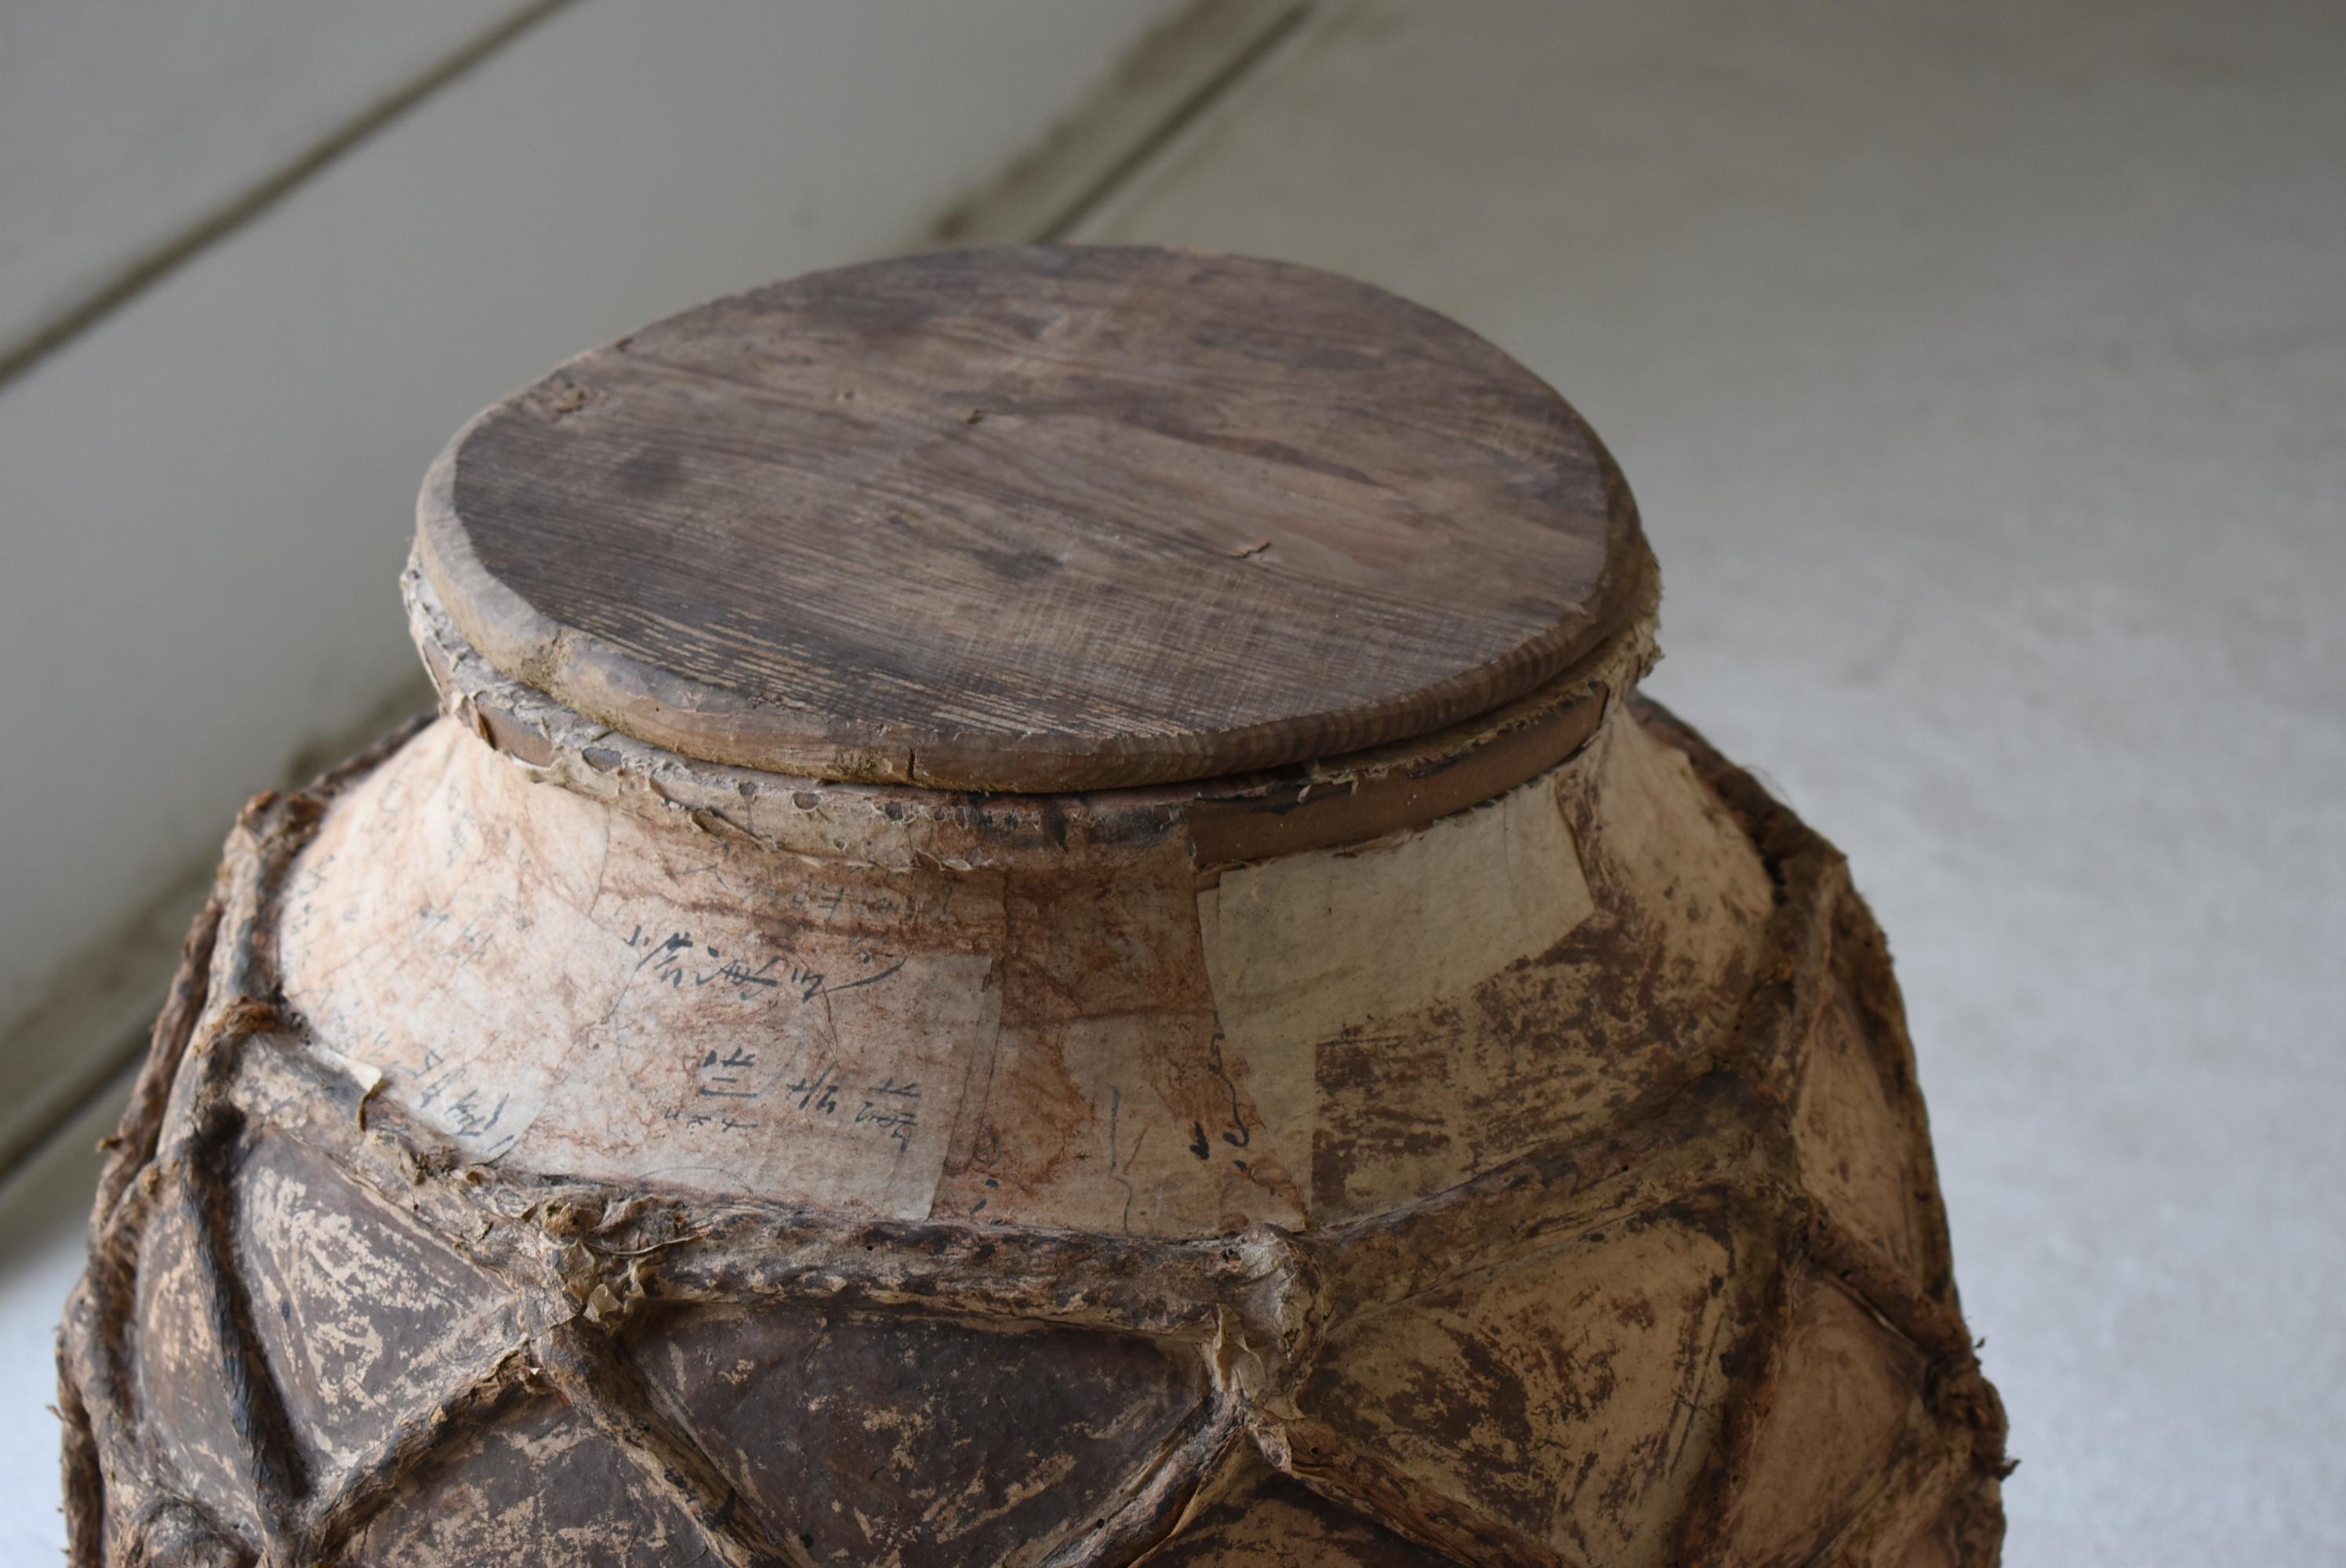 It is a jar baked in Shigaraki (Shiga Prefecture) in Japan.
It seems to be from the Edo period to the Meiji period (1800-1900).

It is used to store tea leaves. Comes with a wooden lid.
A straw string is wrapped around it, and paper is pasted on